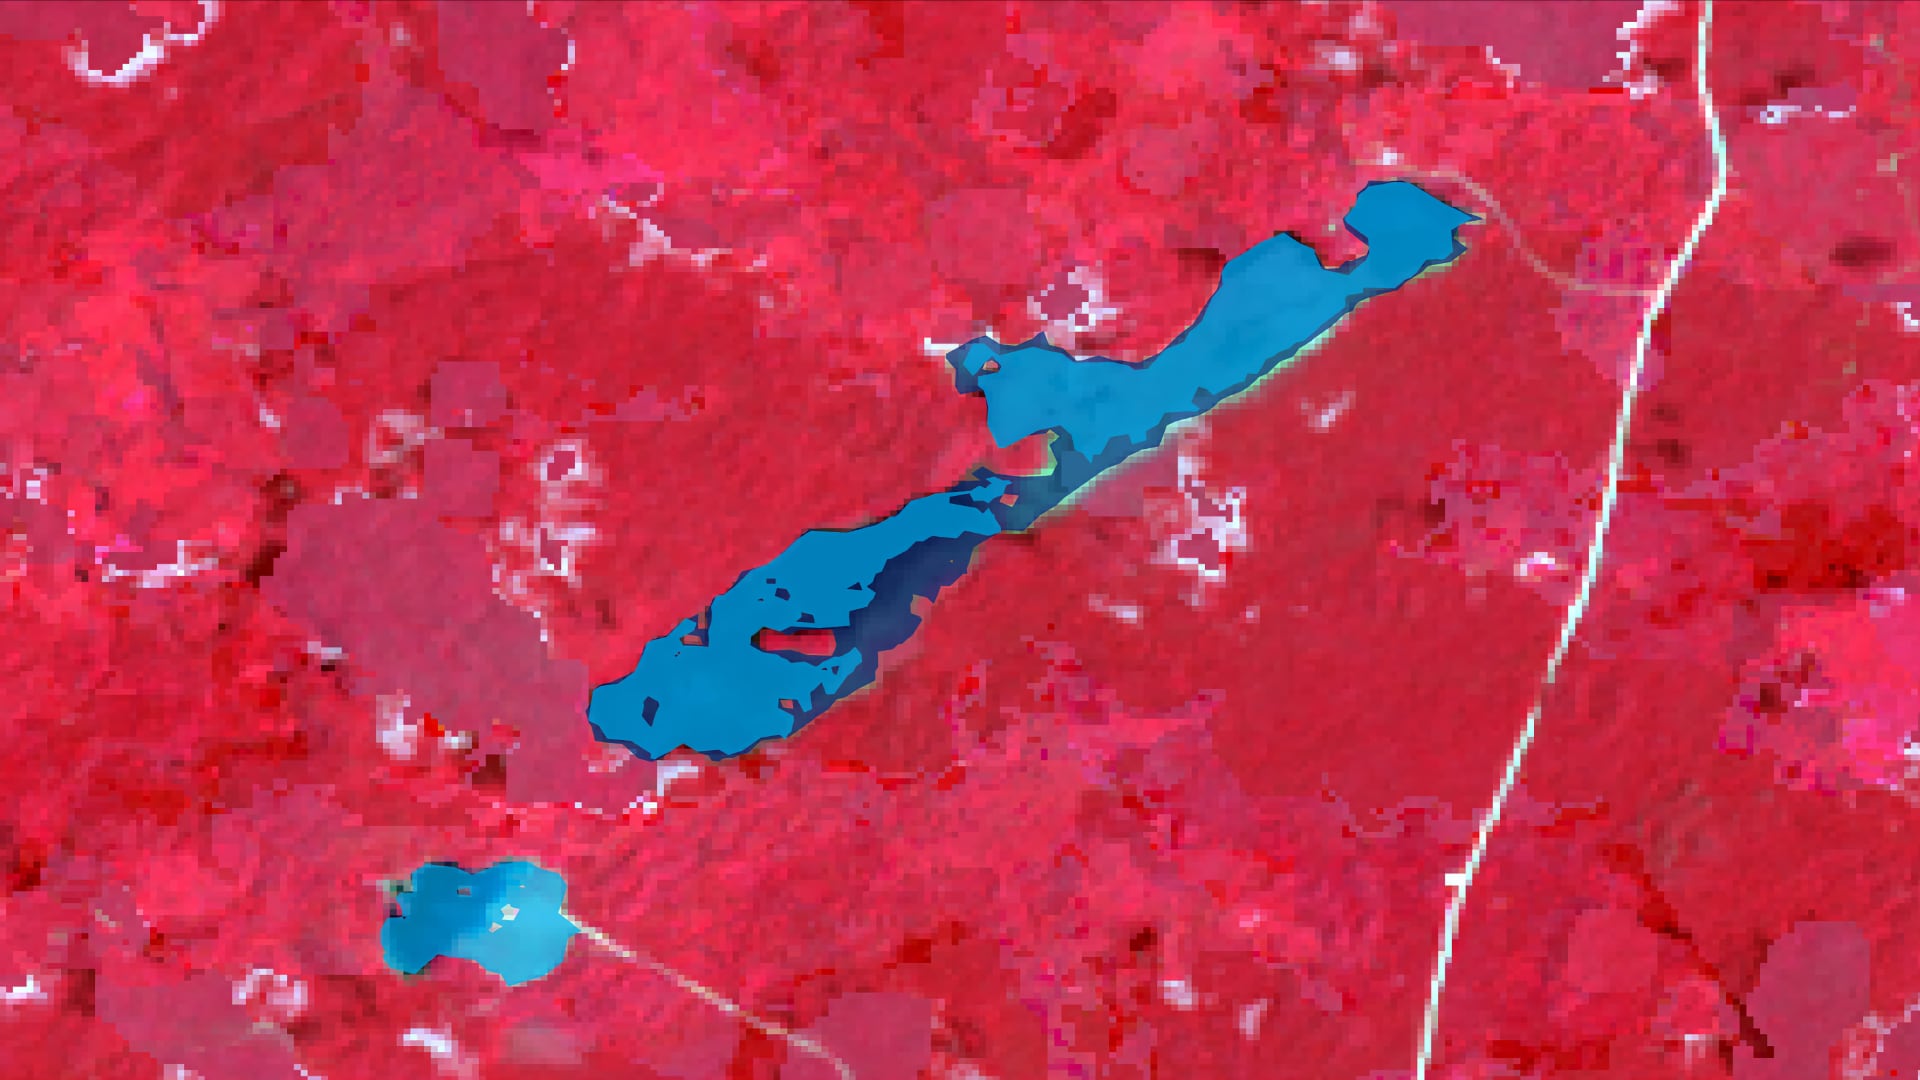 Composited Landsat 8 imagery from March - May 2020 with a false color band combination (5, 4, 3). Dark red represents dense vegetation while light red represents less dense vegetation. Open water masks were applied to ALOS-PALSAR-1 images to delineate the water body extent of Laguna Seca in Belize between June 2008 (light blue) and after Tropical Depression 16 in October 2008 (dark blue). Environmental departments can make informed management decisions by monitoring flood-prone areas.Keywords: Kat Tafoya, ALOS PALSAR 1, Landsat 7, seasonal inundation, forest canopy, wetlands, L-band SAR